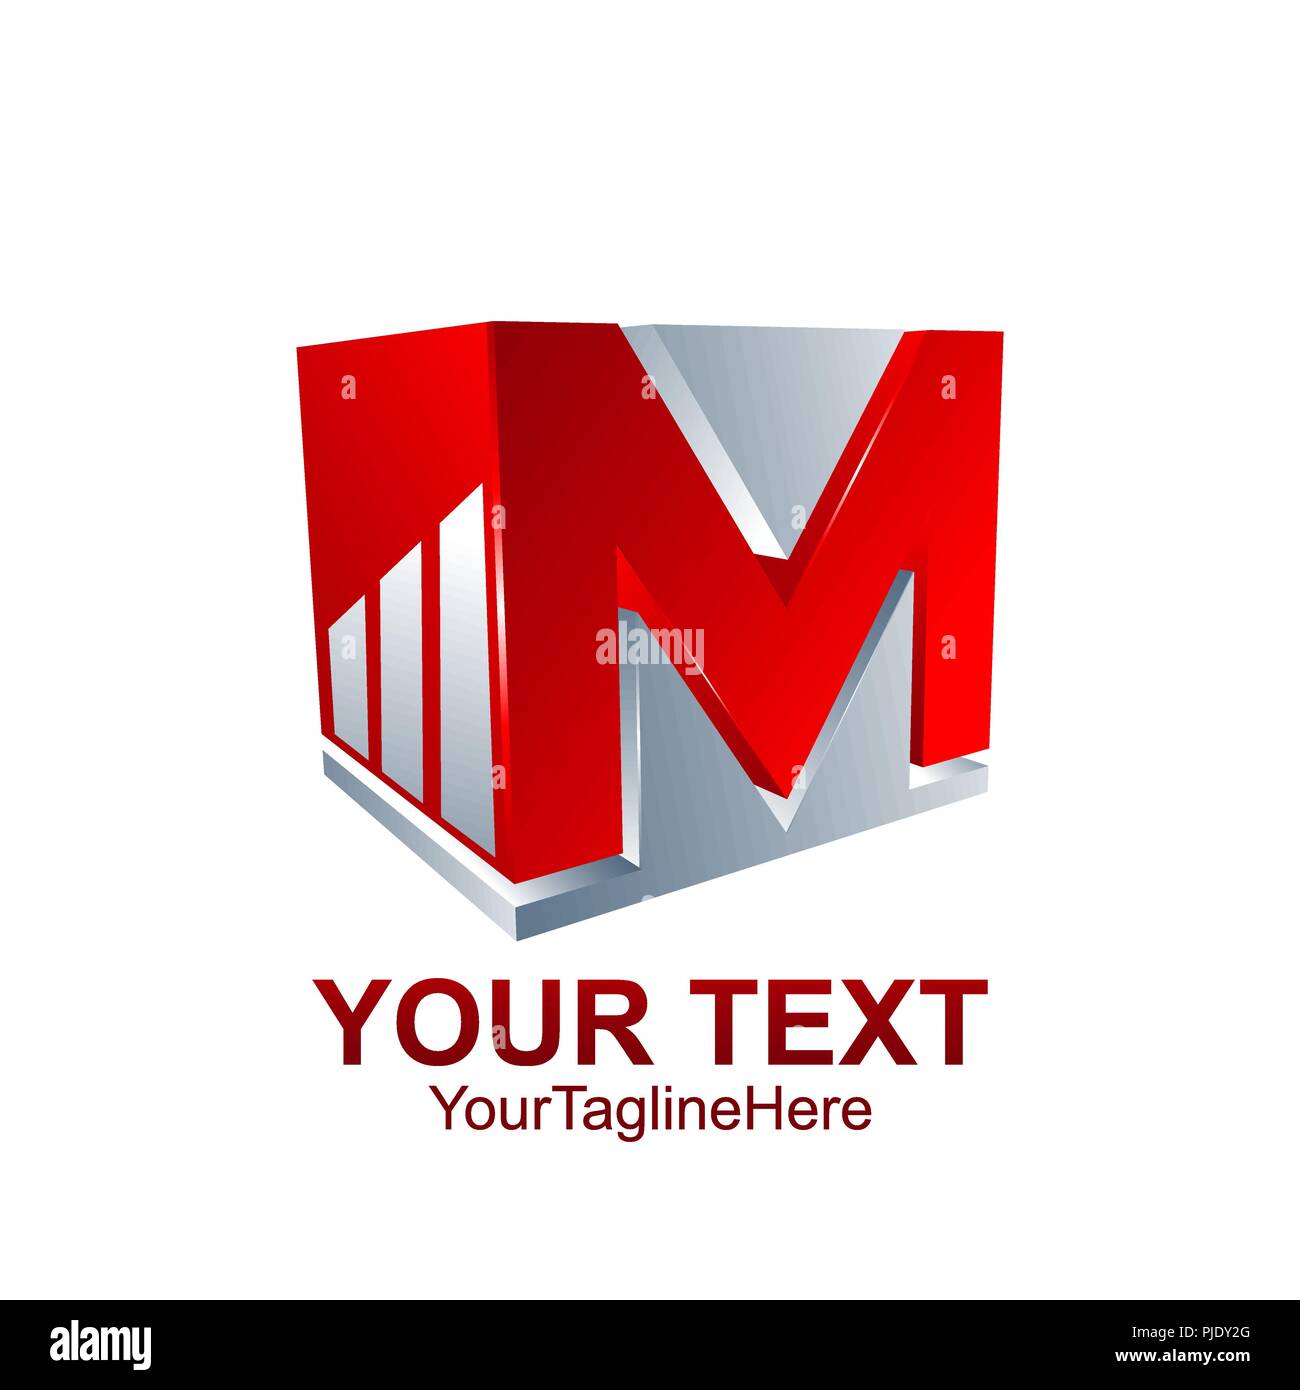 Letter MM and M Logo Icon Design Graphic by mdmafi3105 · Creative